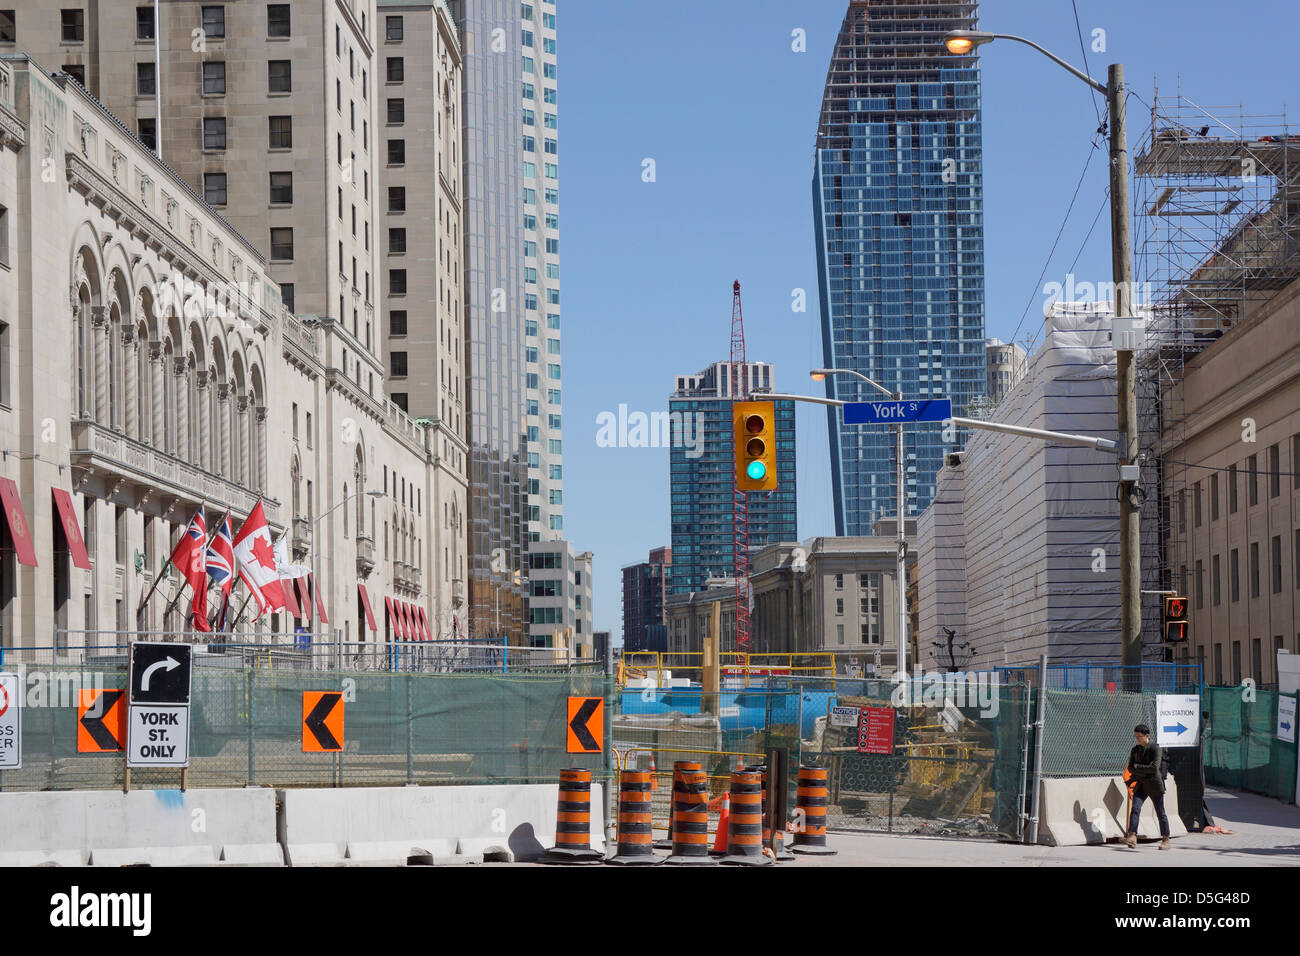 Front Street at Union Station, Front and York St. March 2013. Stock Photo